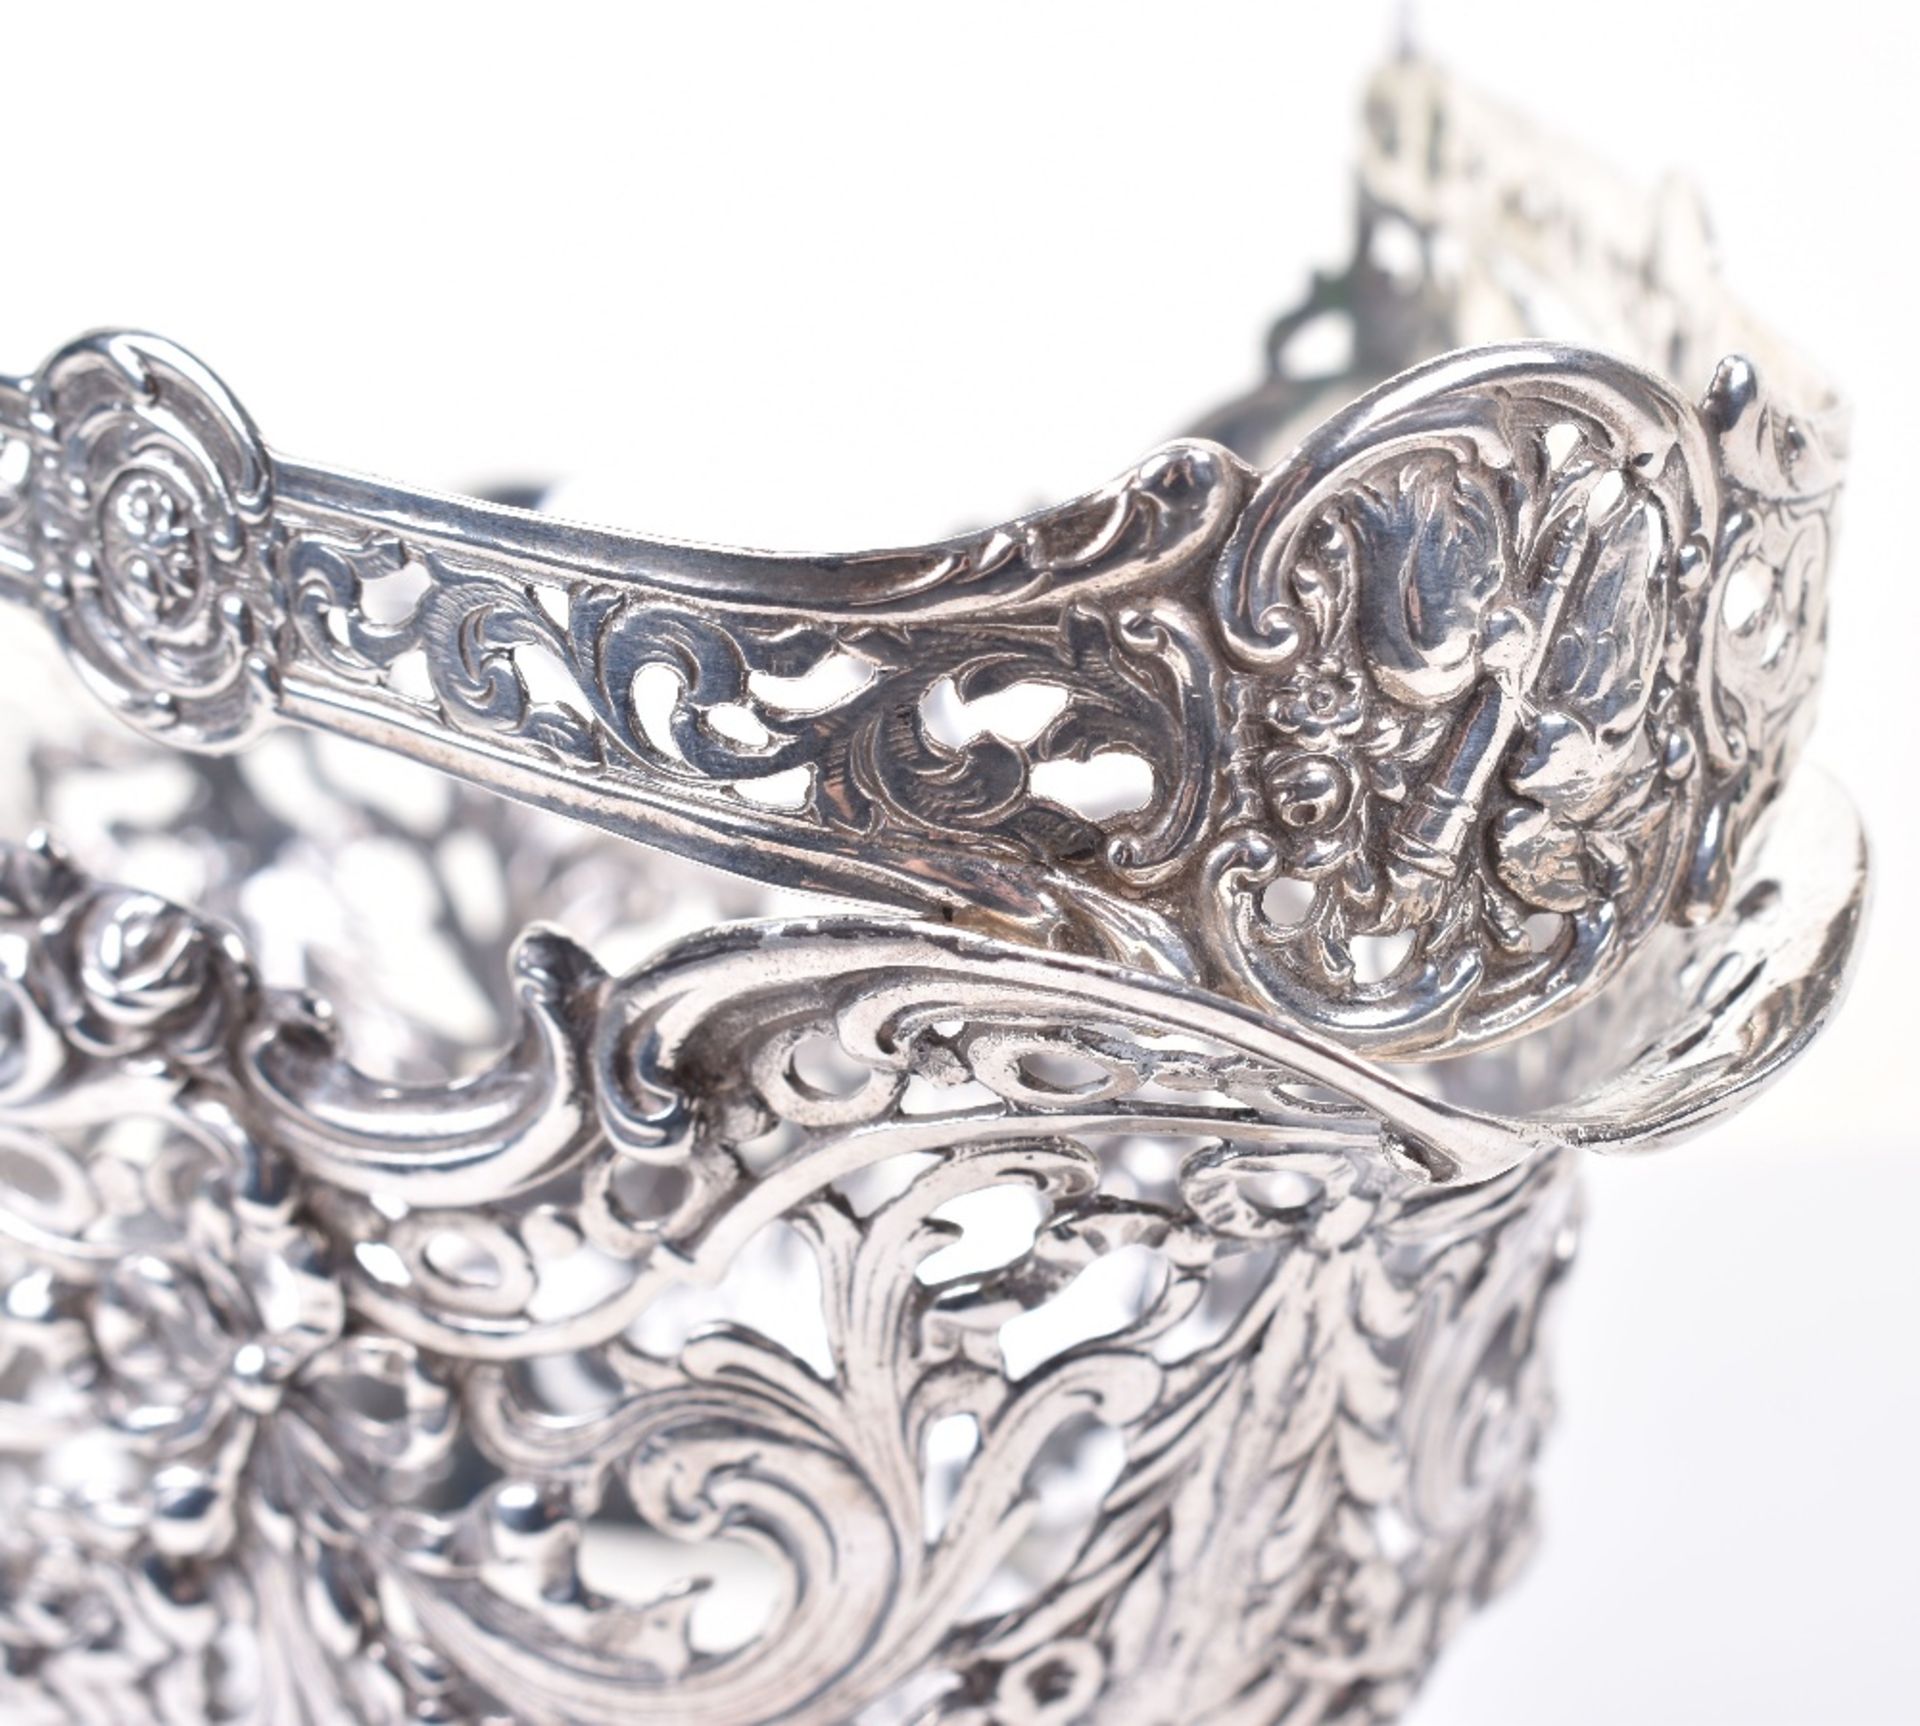 A 19th century German silver (.800) sweet basket - Image 6 of 6